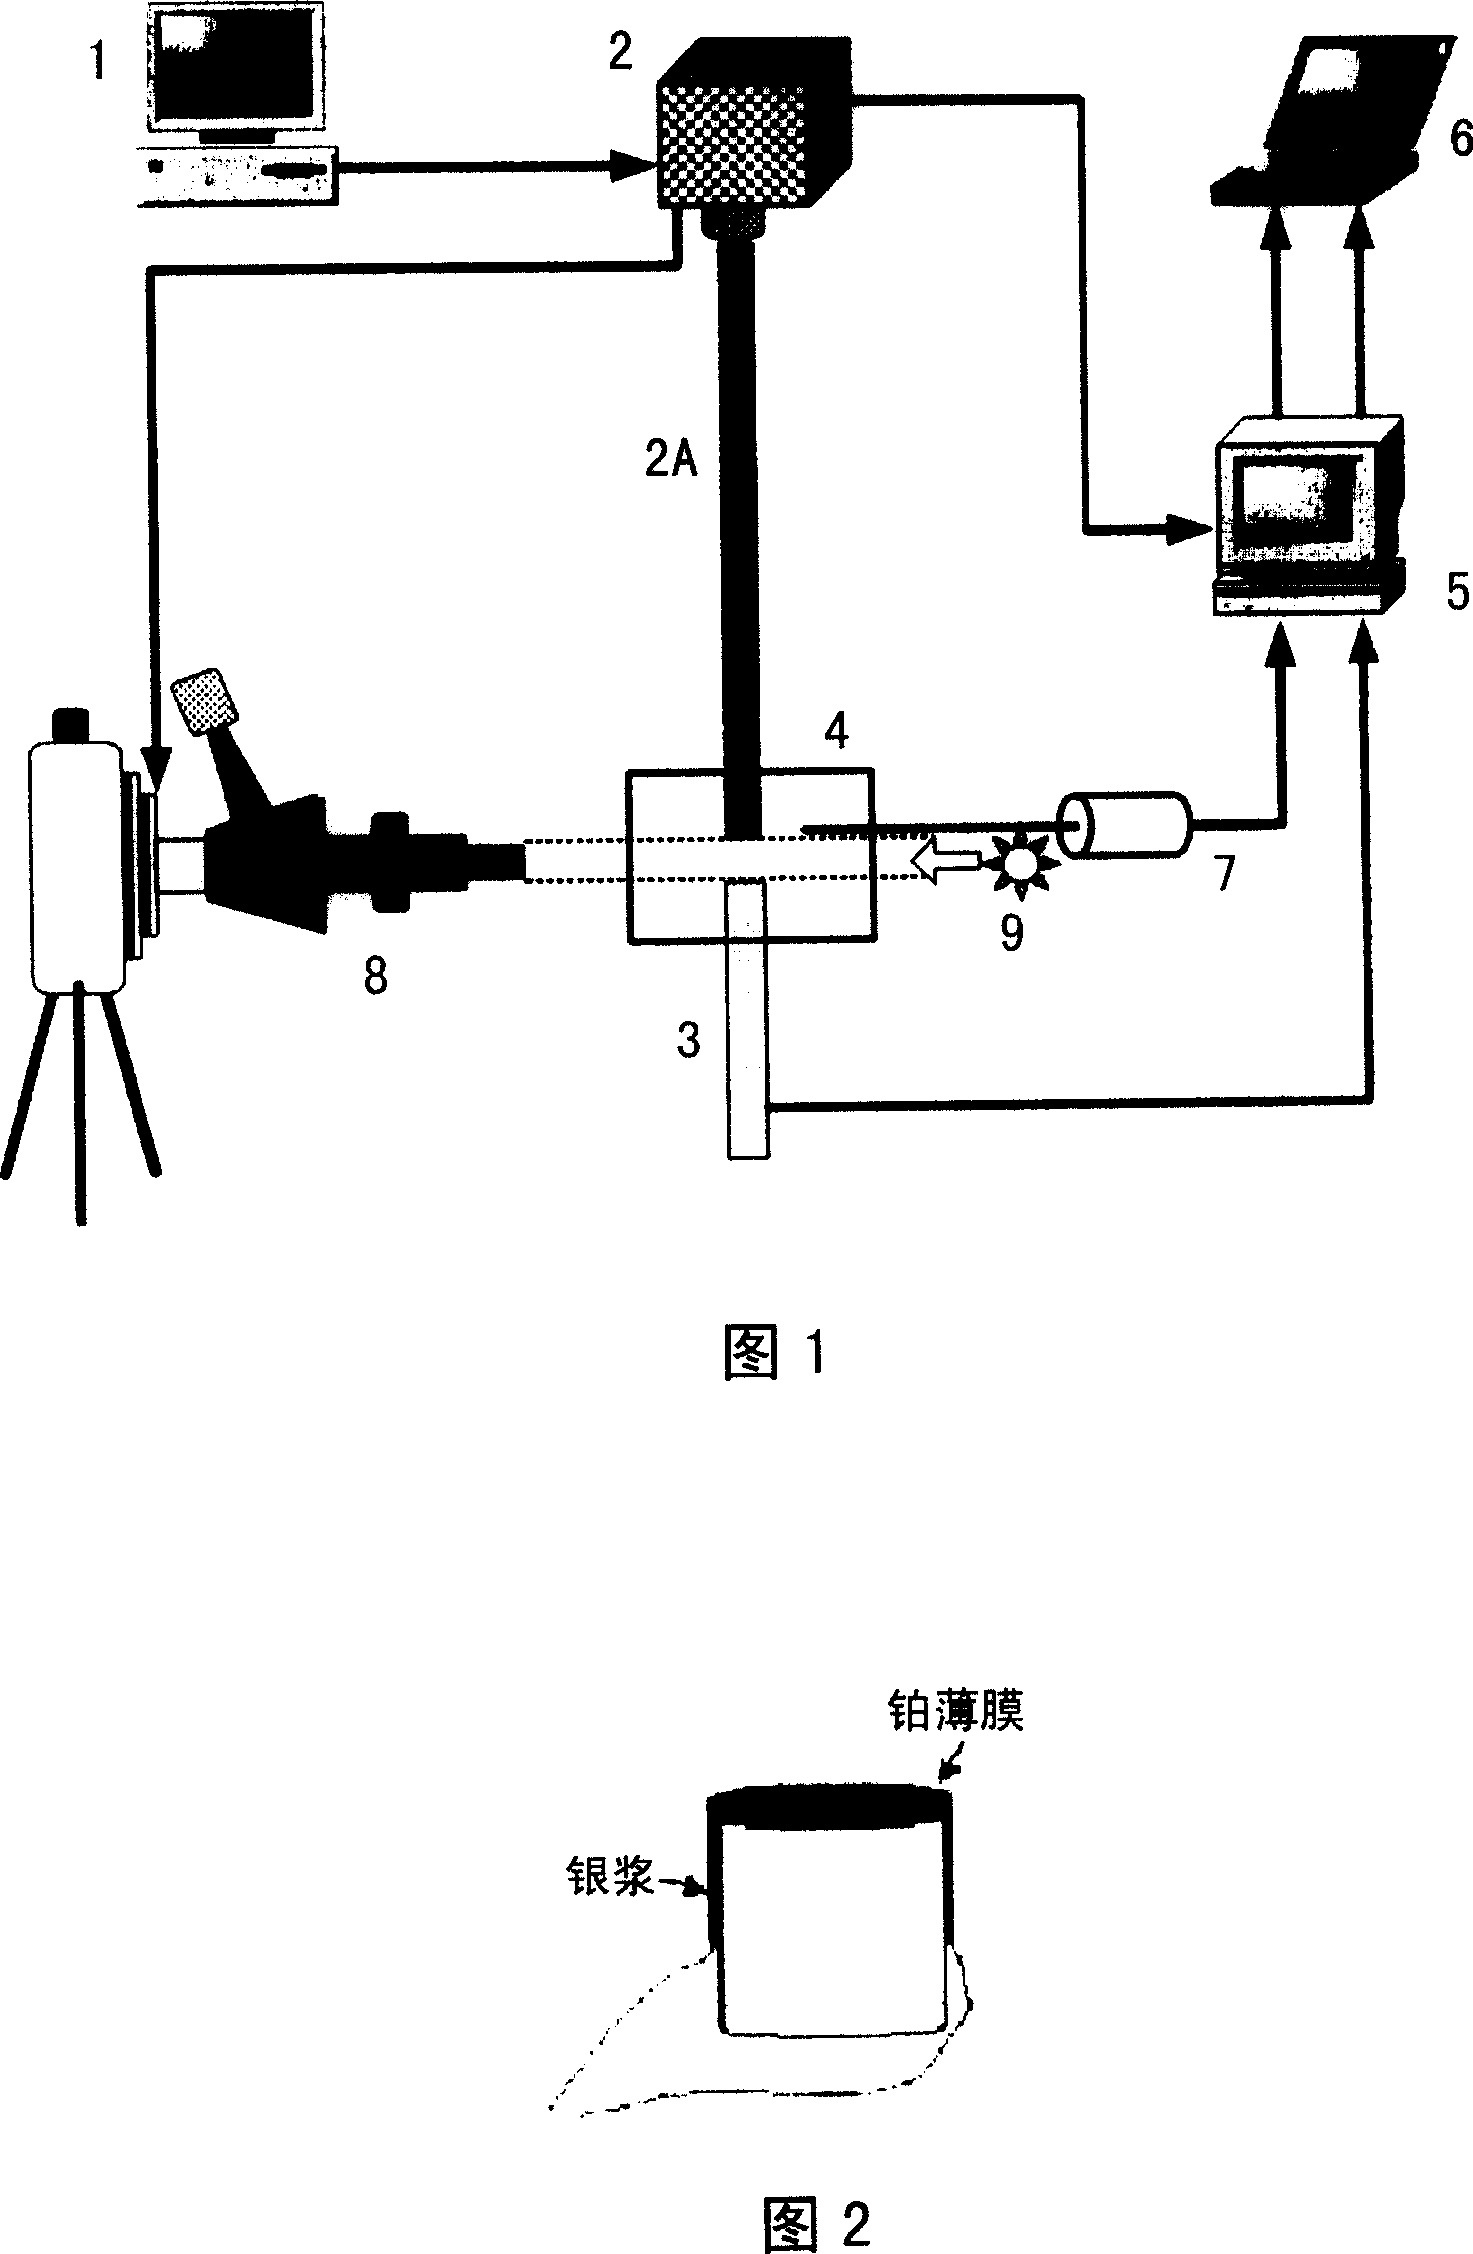 Visual inspection and transient measurement system for micro-scale explosive boiling process